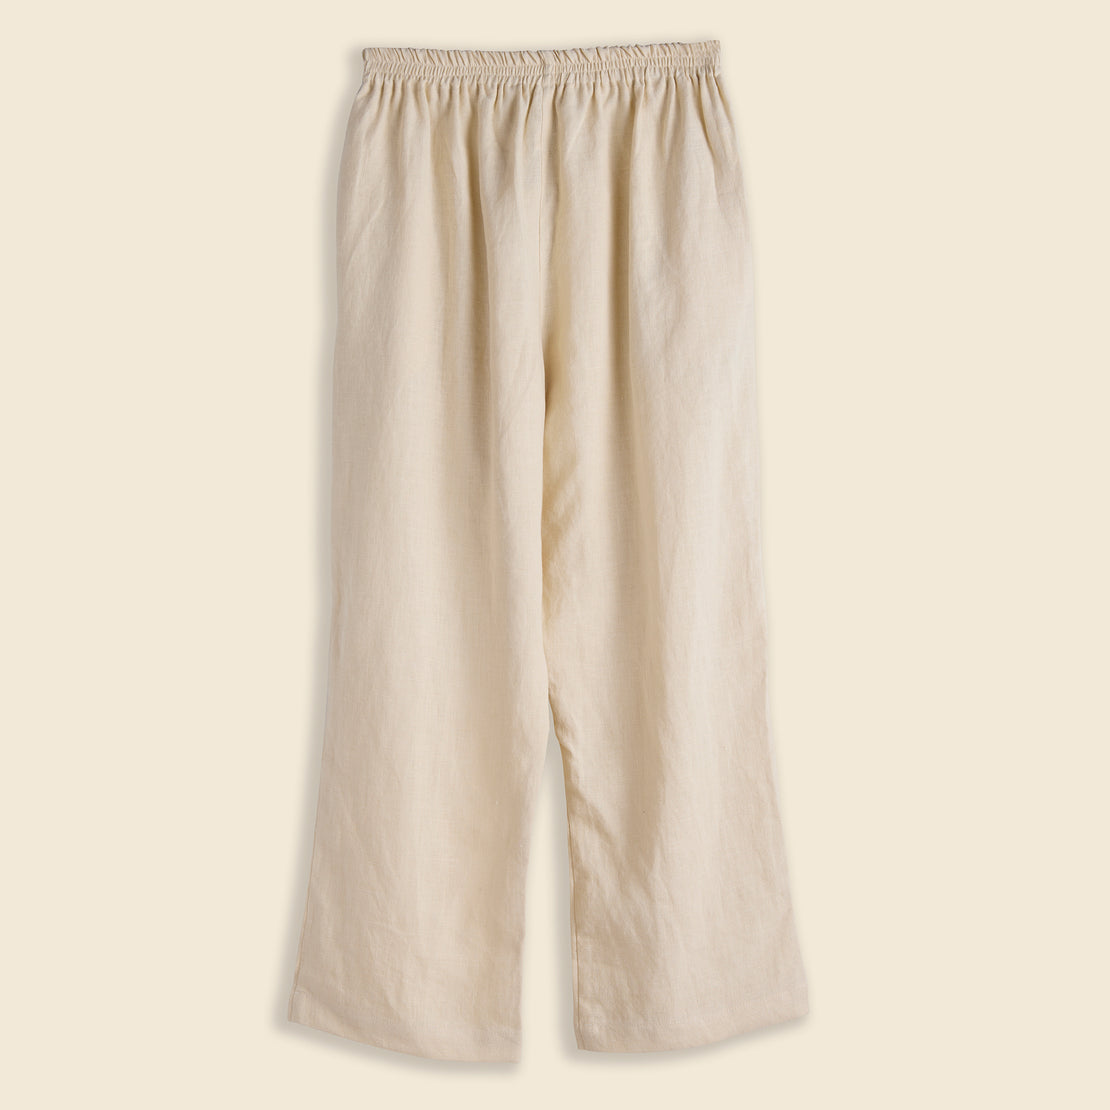 Tazzeka Pant - Cream - Limo - STAG Provisions - W - Pants - Twill